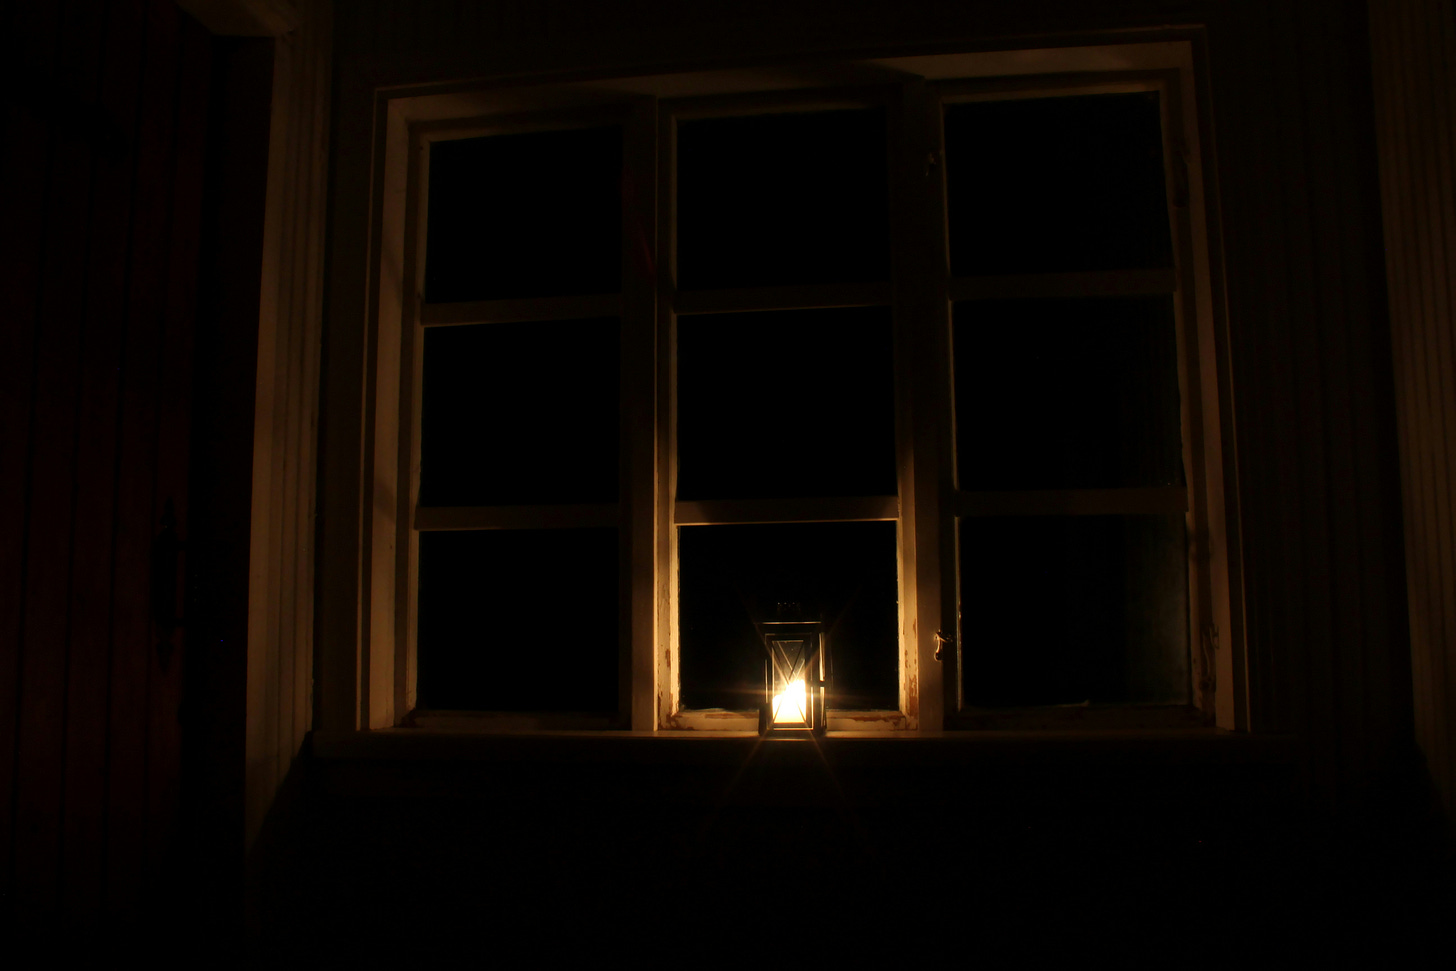 Photograph of a dark room with a lamp on the windowsill. The lamp gives off a warm golden glow.